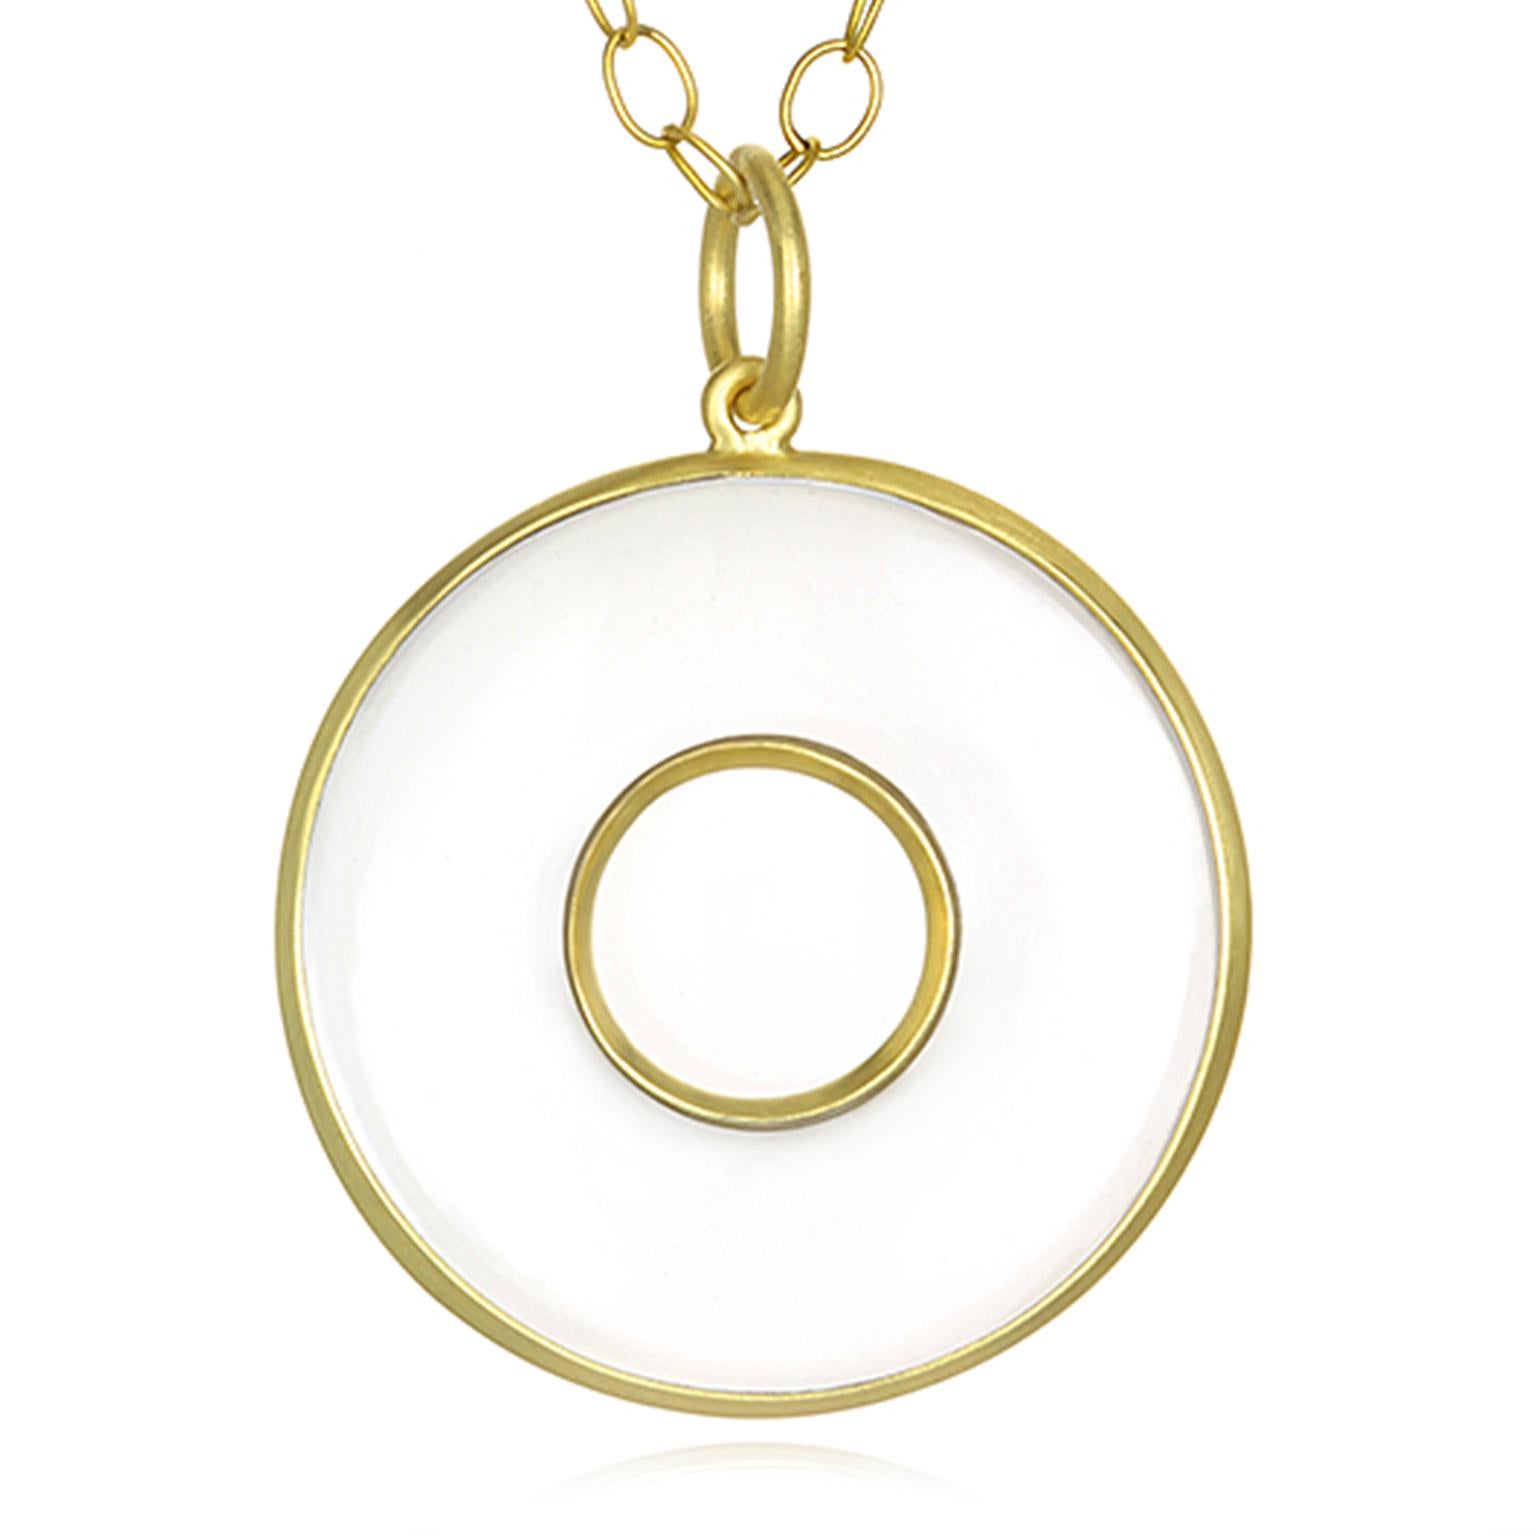 Faye Kim's Circle of Life pendant in Crystal Quartz is custom cut and hand-framed in 18k gold.  Known as the Master Healer, Rock Crystal Quartz is a natural clear gemstone believed to amplify energy as one of the most powerful healing stones. 